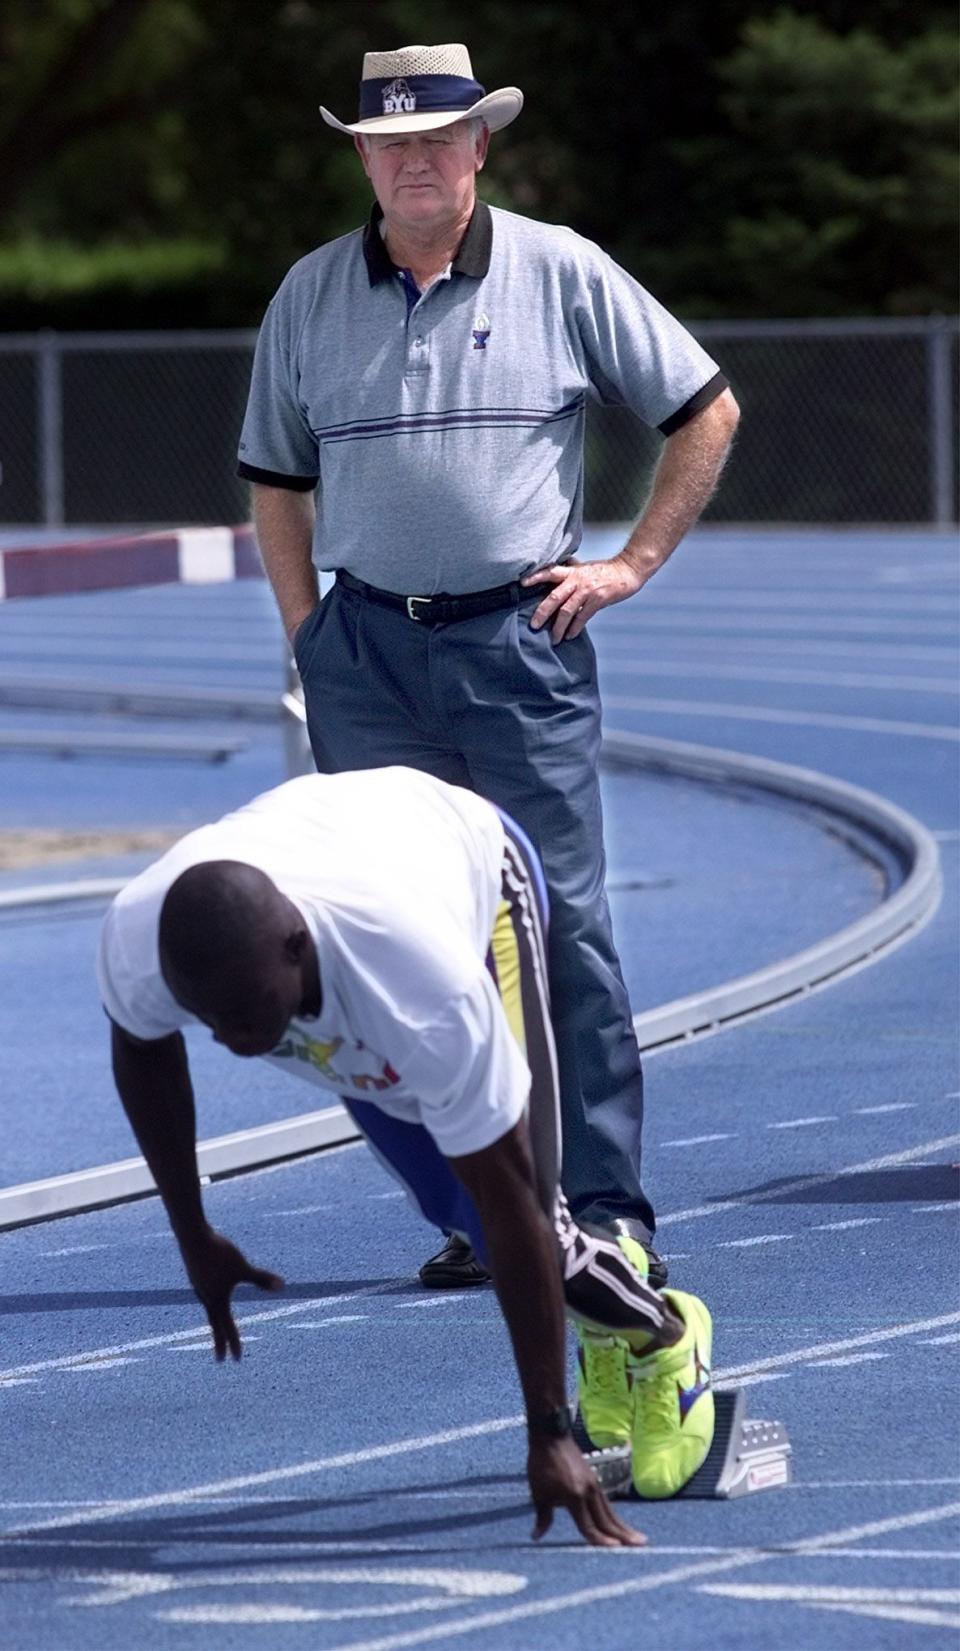 BYU track coach Willard Hirschi is photographed during practice on Thursday, May 25, 2000. | Chuck Wing, Deseret News